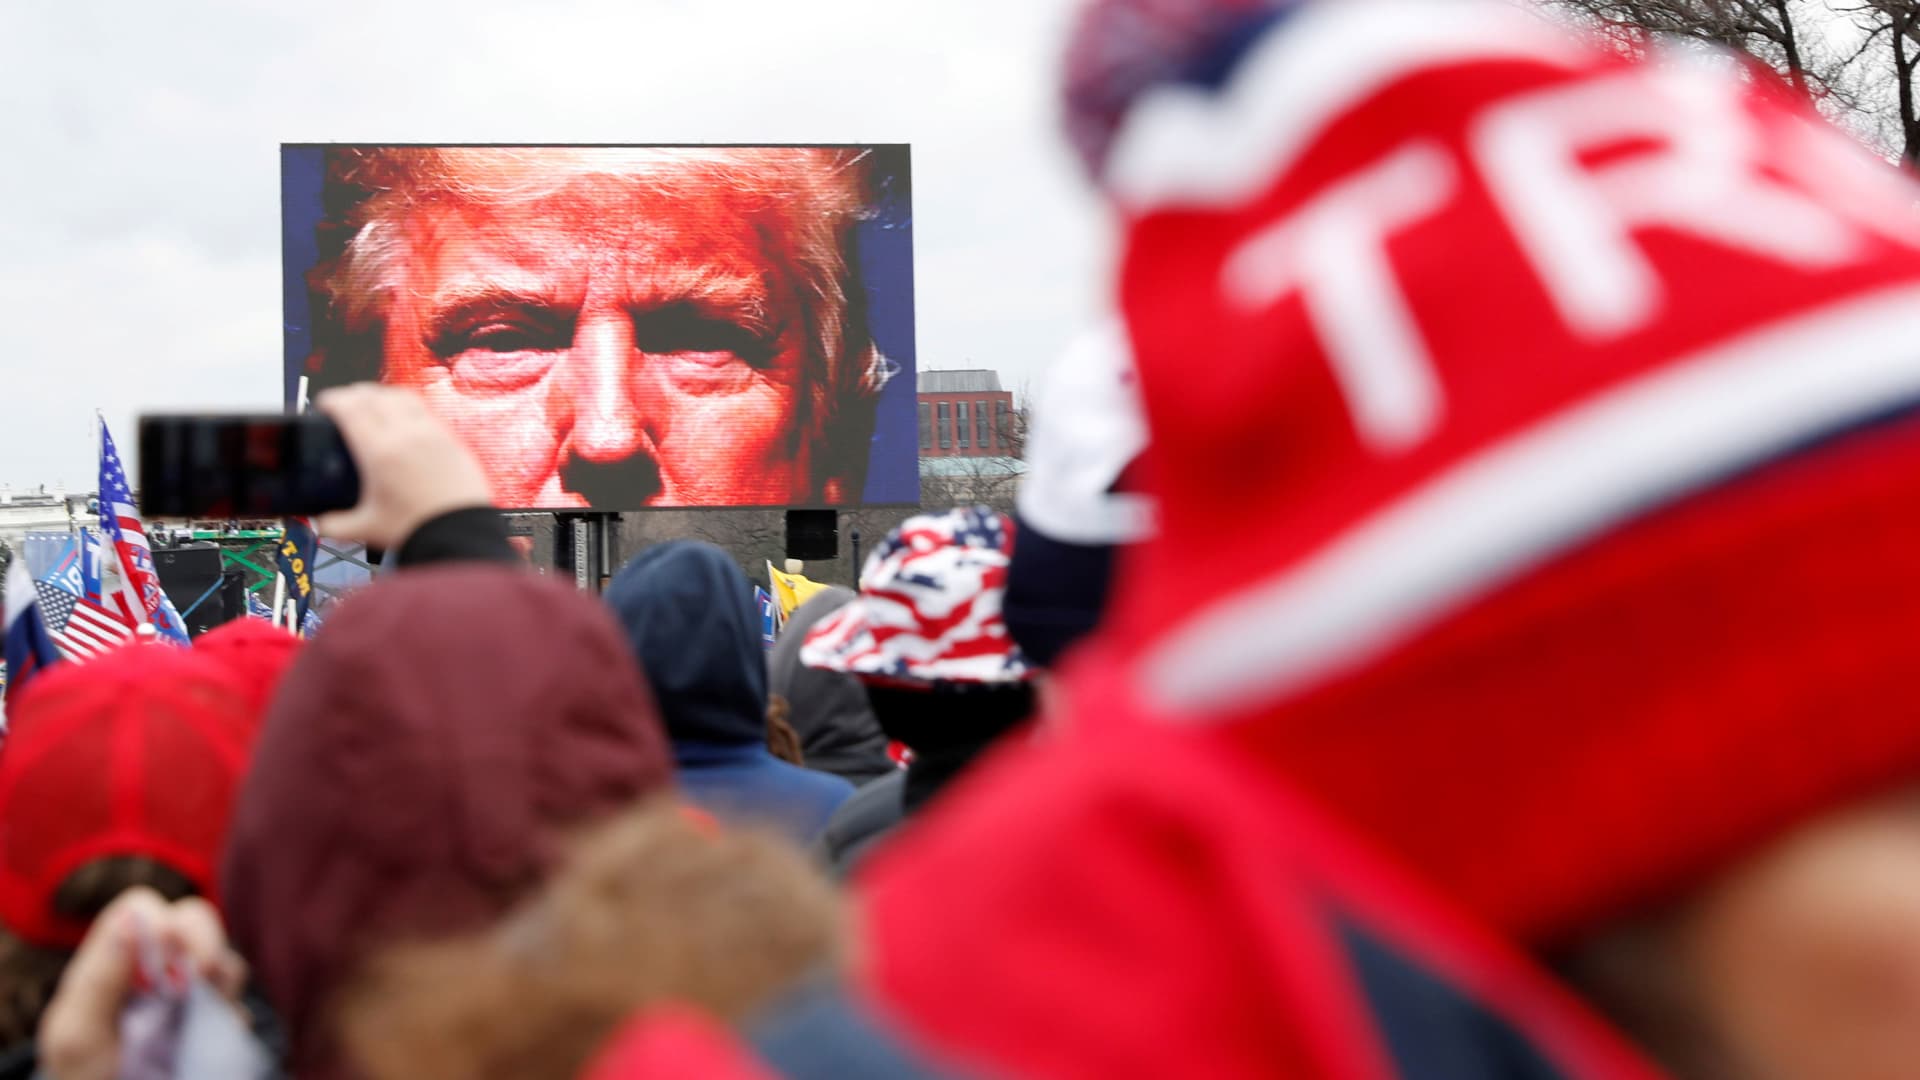 President Donald Trump is seen on a screen speaking to supporters during a rally to contest the certification of the 2020 U.S. presidential election results by the U.S. Congress, in Washington, January 6, 2021.